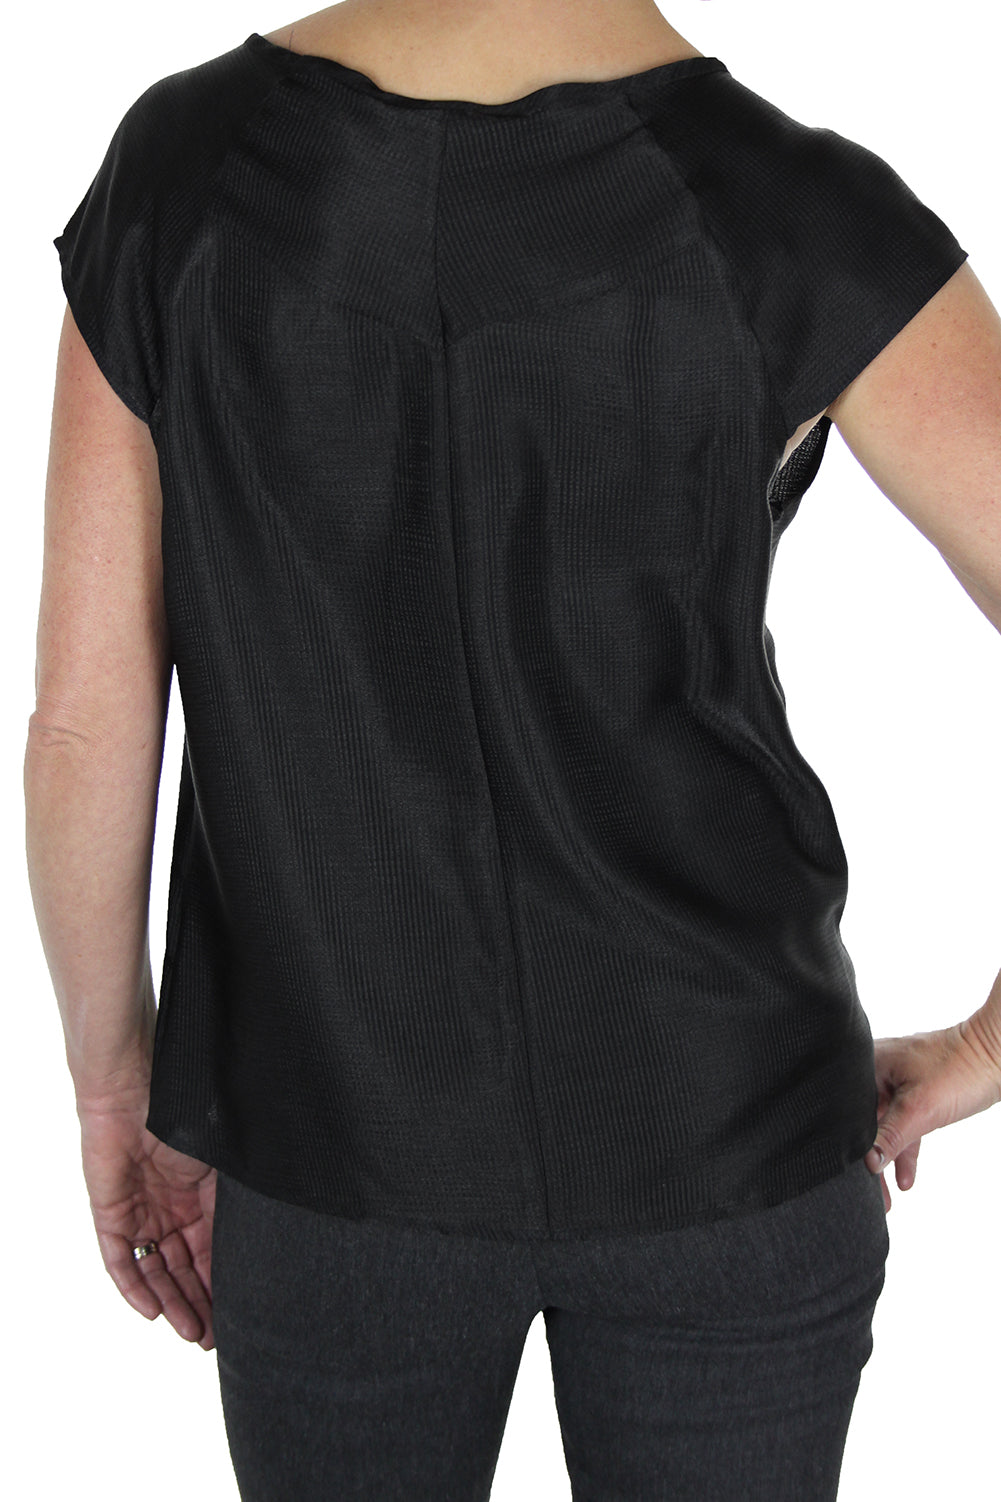 Silky Feel Textured Top With Shine Black